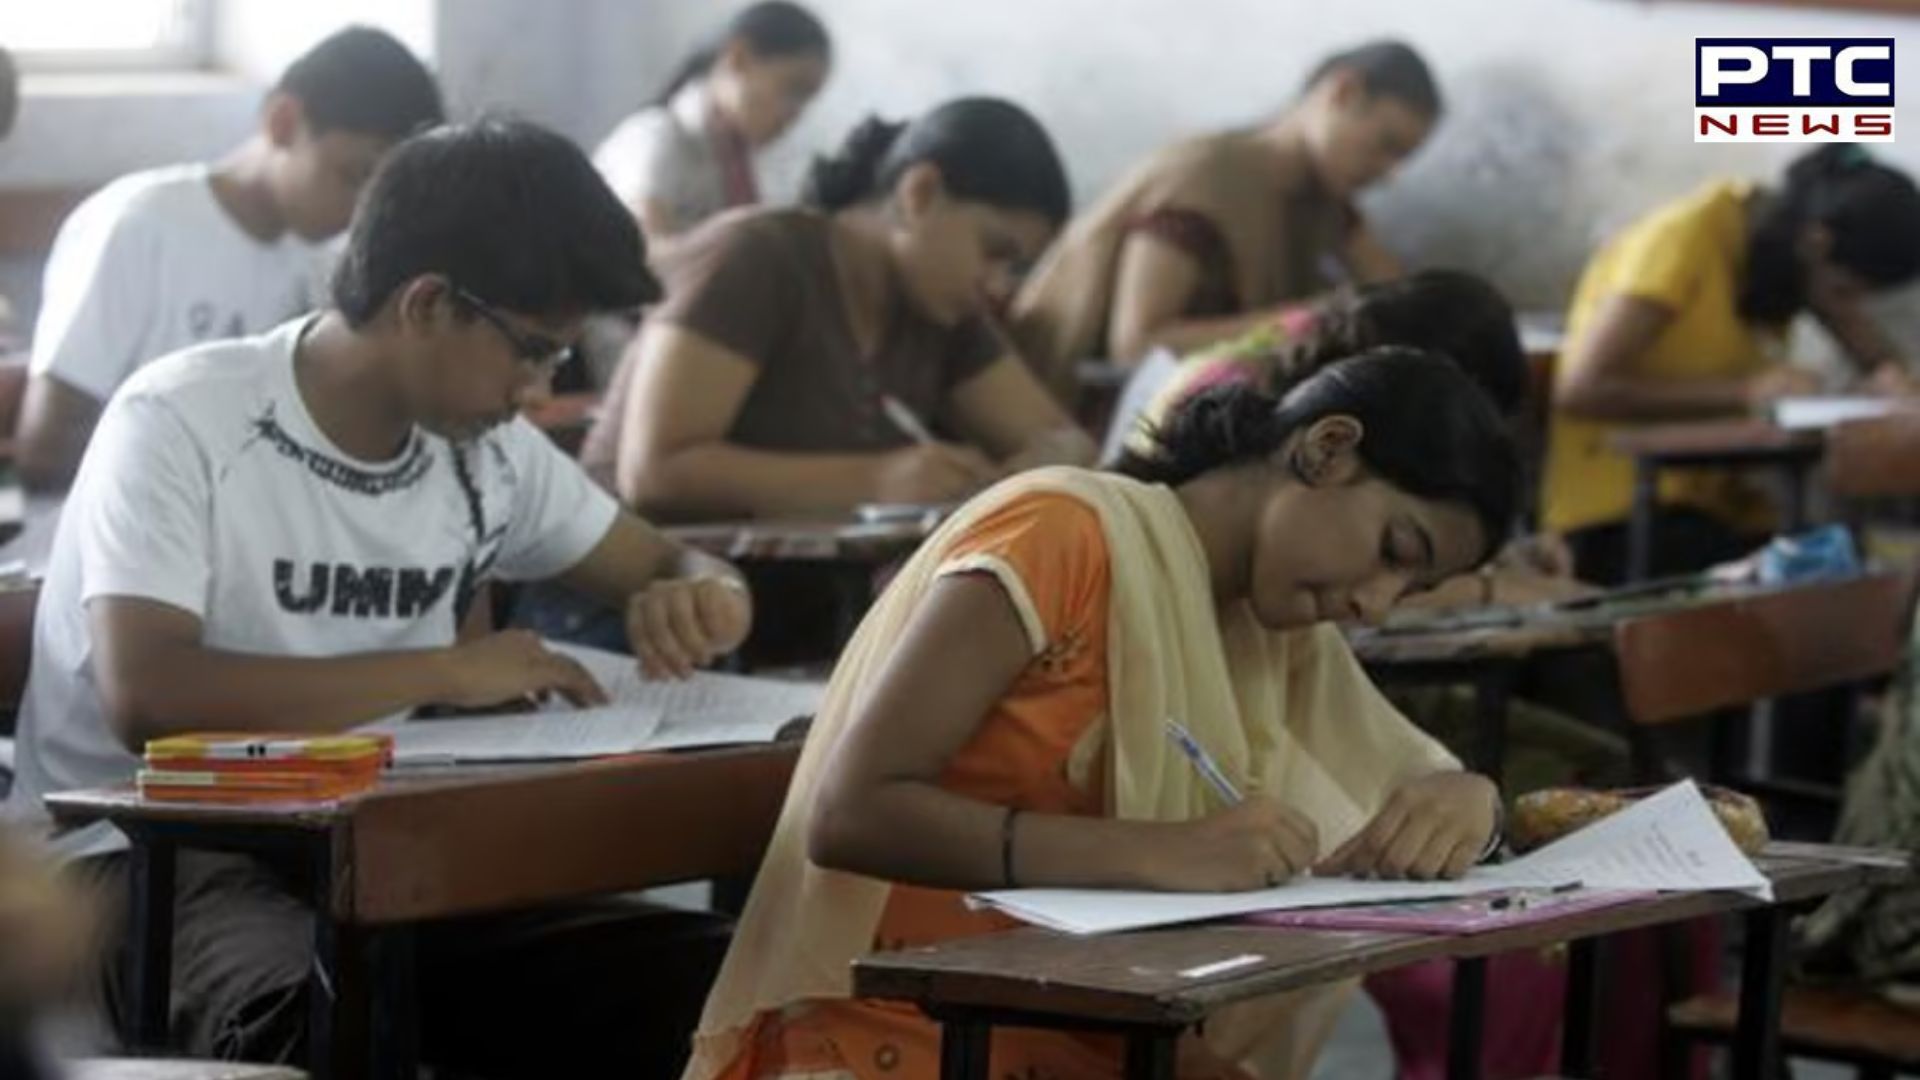 Lok Sabha passes 'anti-cheating' bill; here's all you need to know about Public Examinations Bill